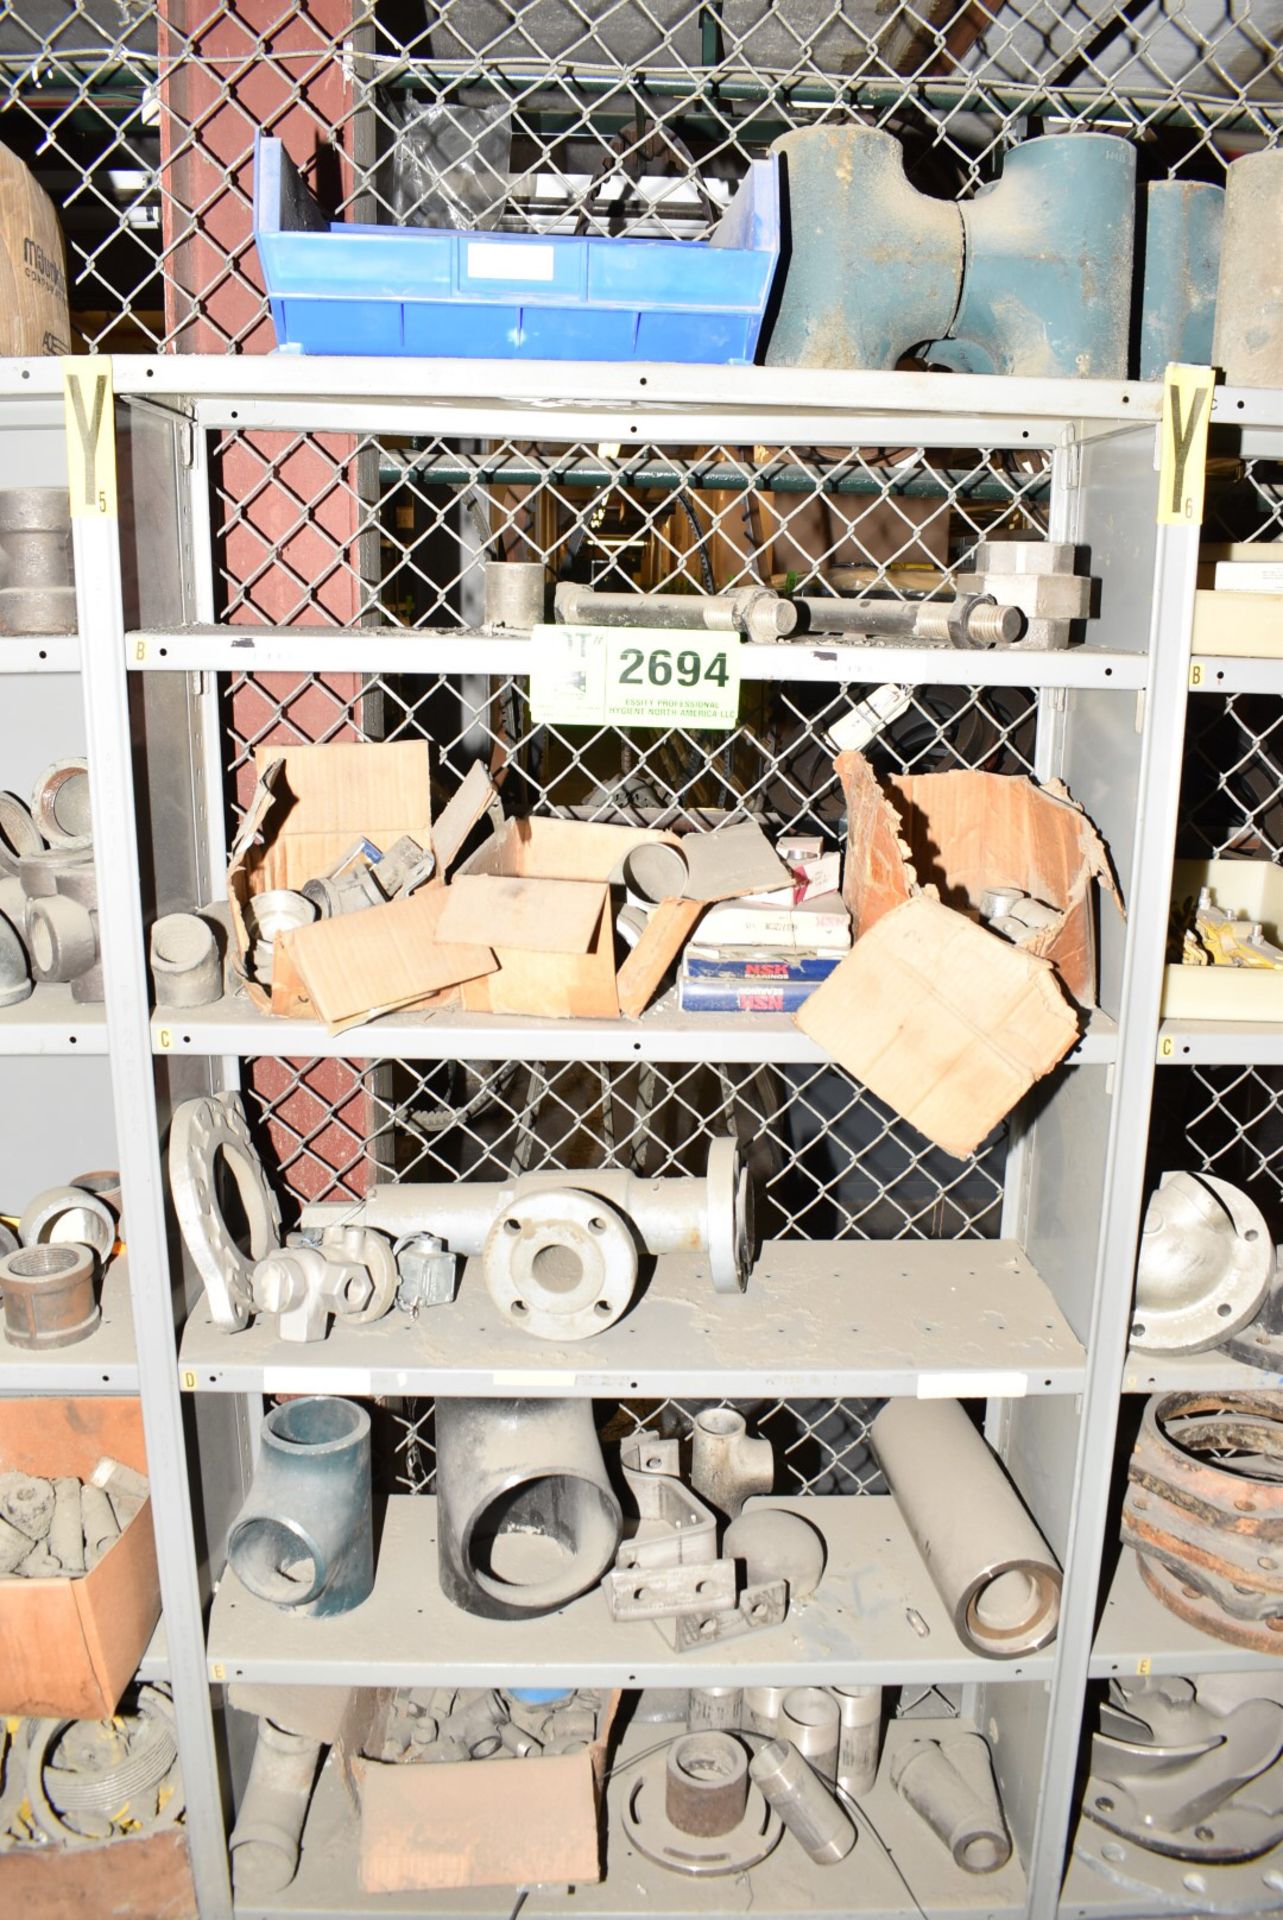 LOT/ CONTENTS OF SHELF - INCLUDING COUPLINGS, FLANGES, SPARE PARTS [RIGGING FEES FOR LOT #2694 - $